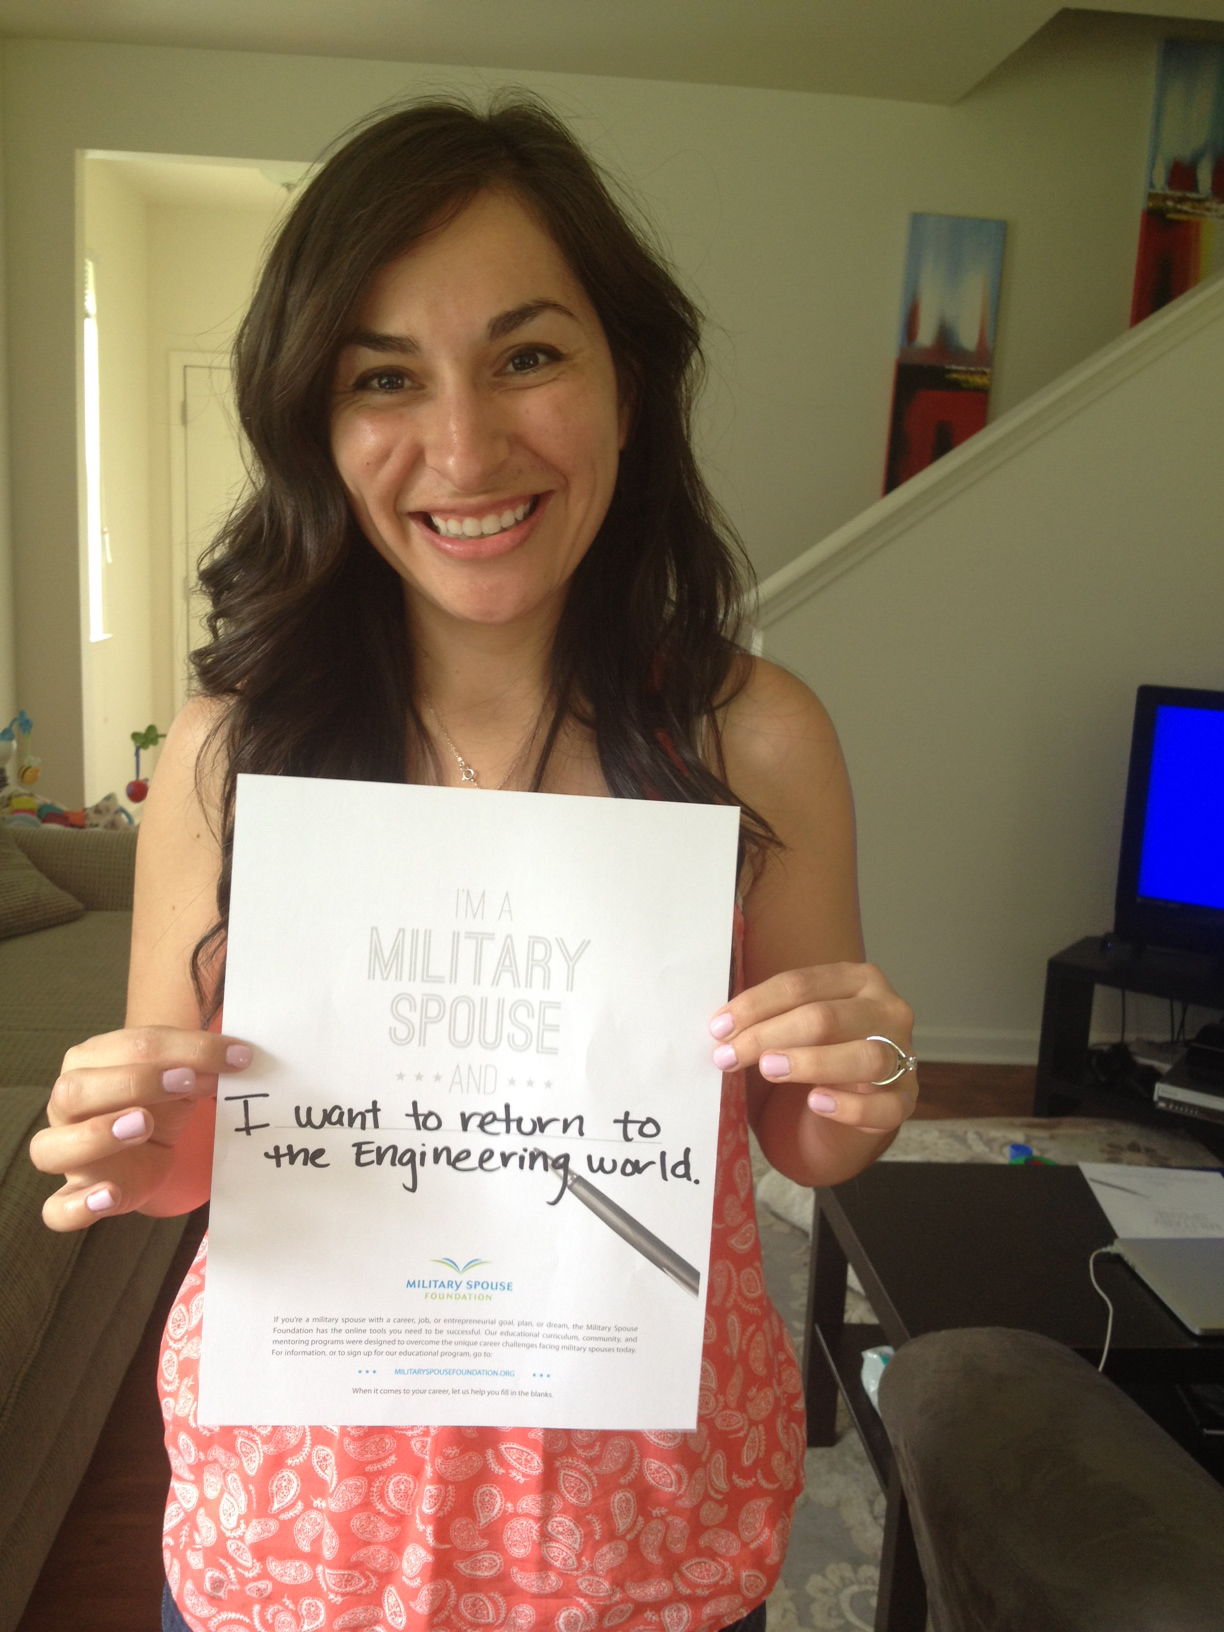 I'm a military spouse and ... I want to return to the engineering world.